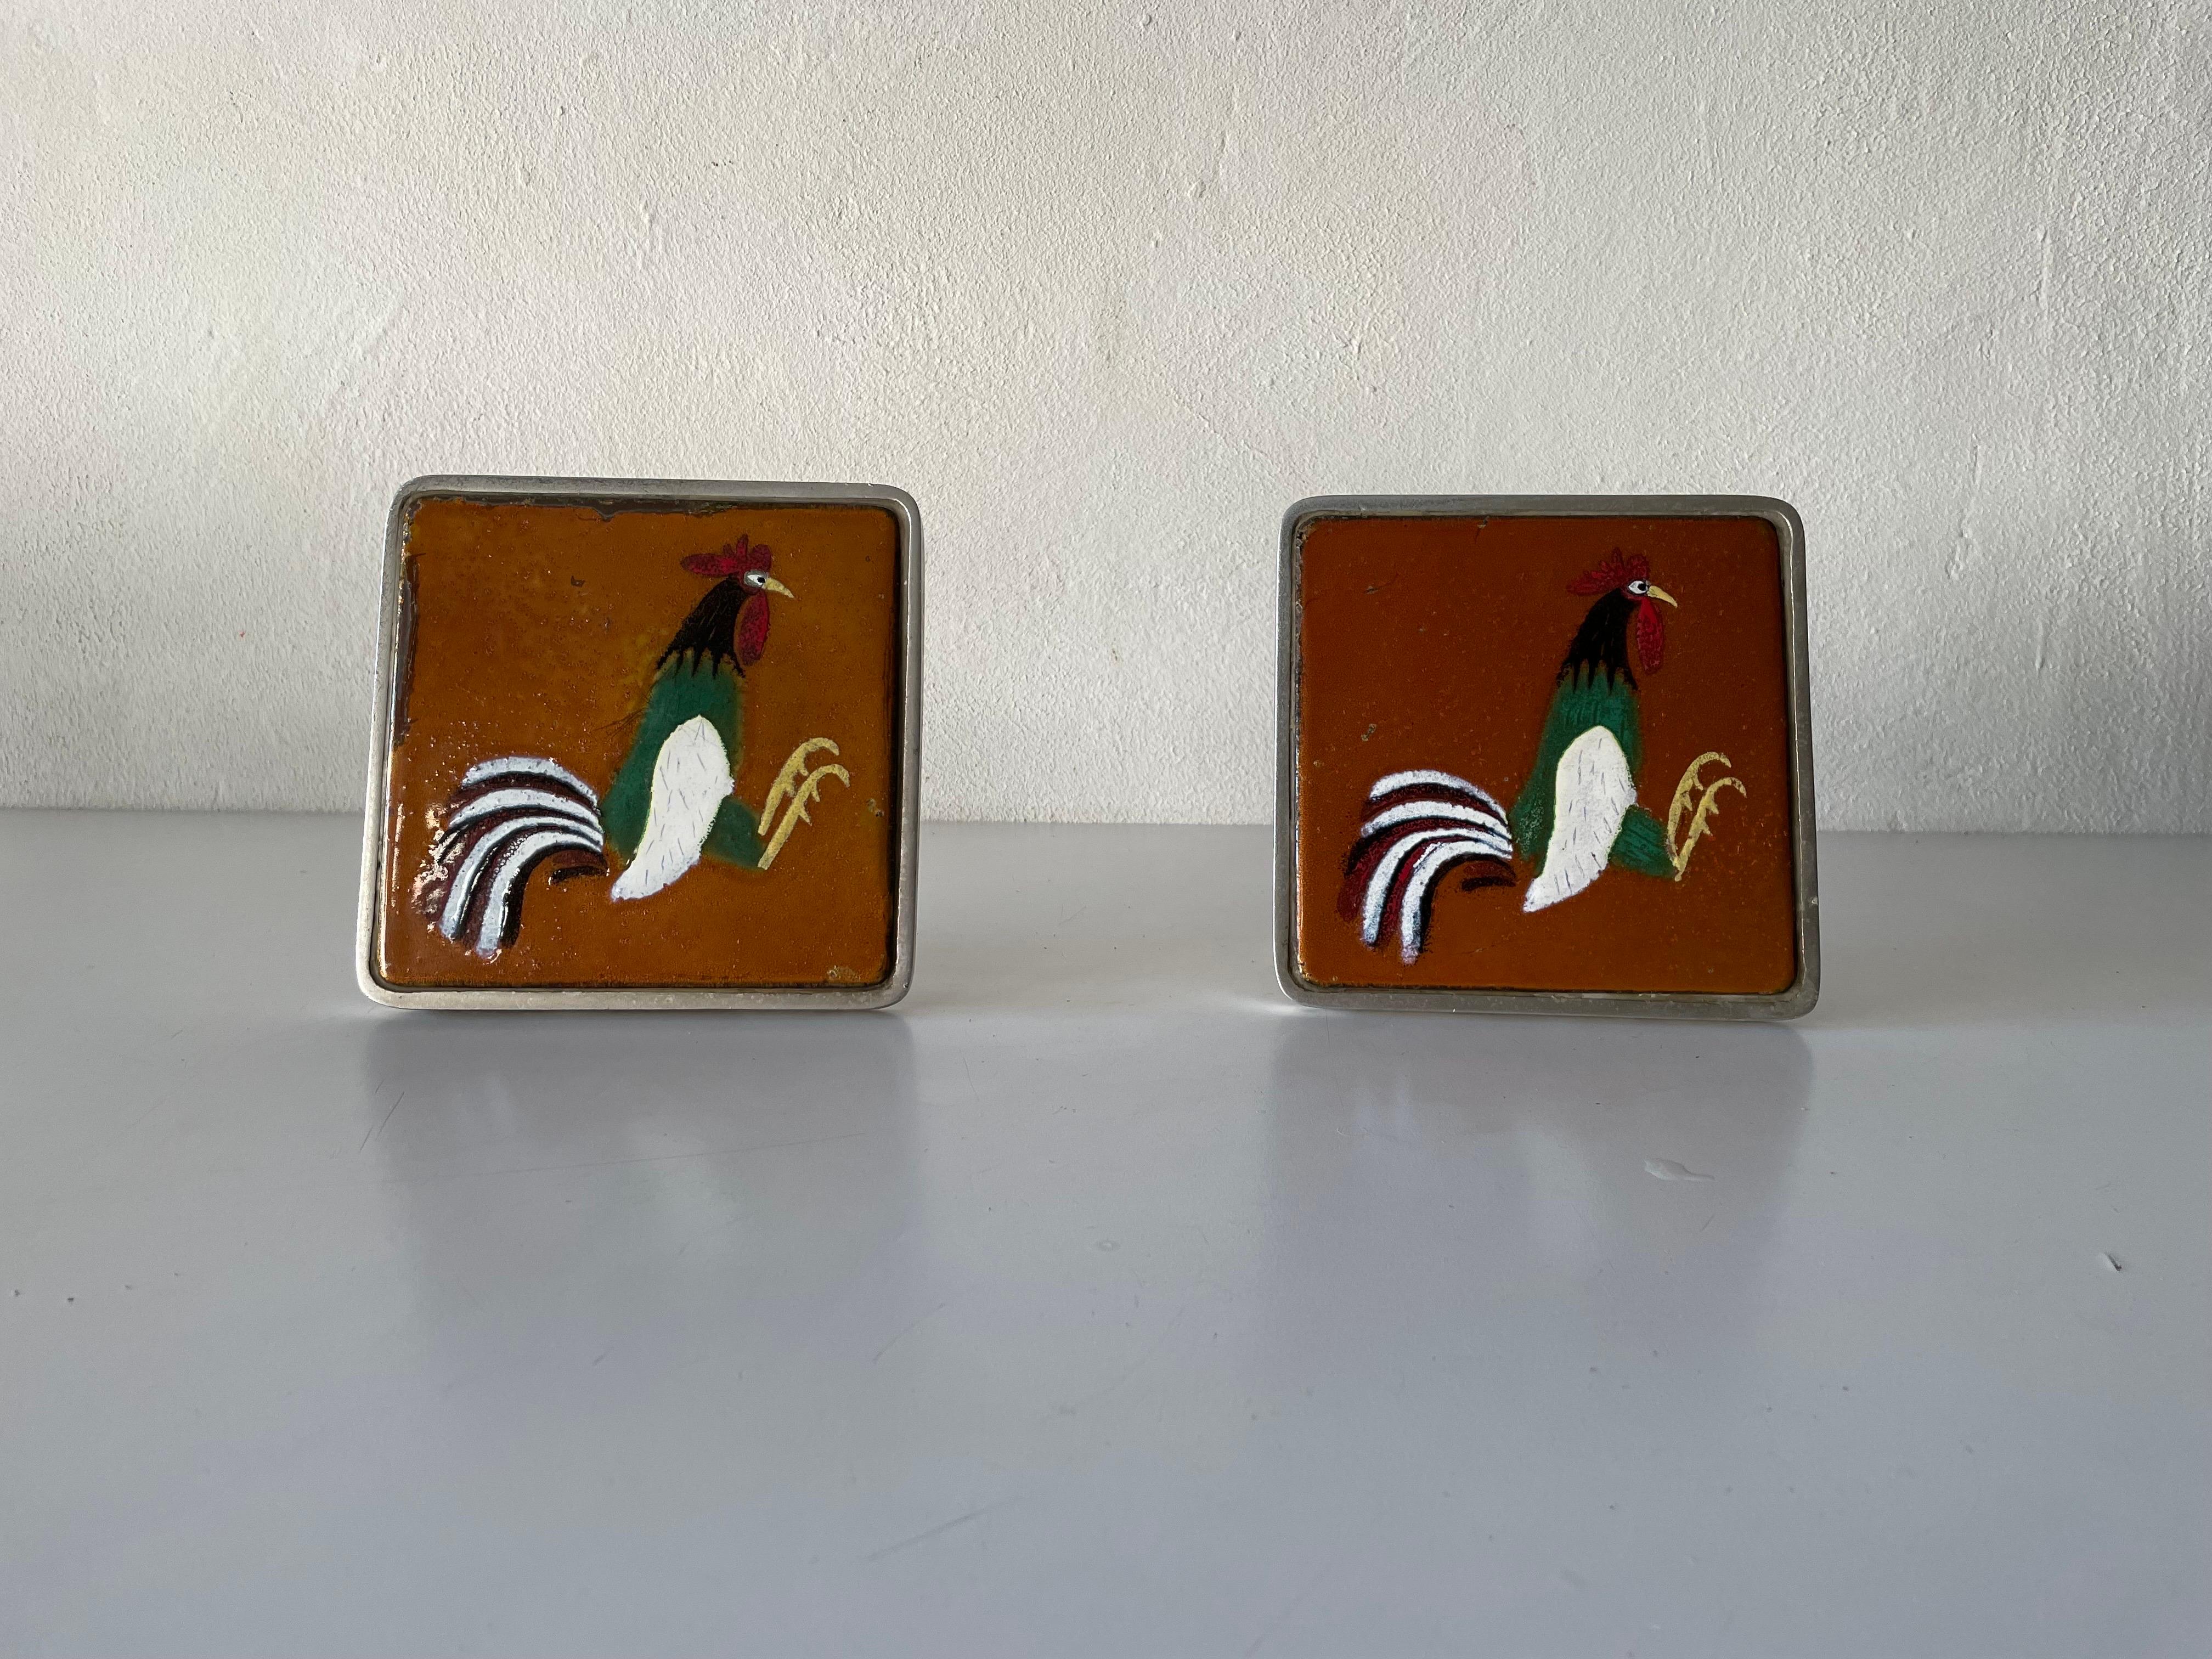 Pair of Aluminum Rooster Door Handles by WSS, Glass Printed on Copper, 1950s, Germany

Measurements: 
20 cm x 20 cm x 9 cm


Please do not hesitate to ask us for your any type of questions.
